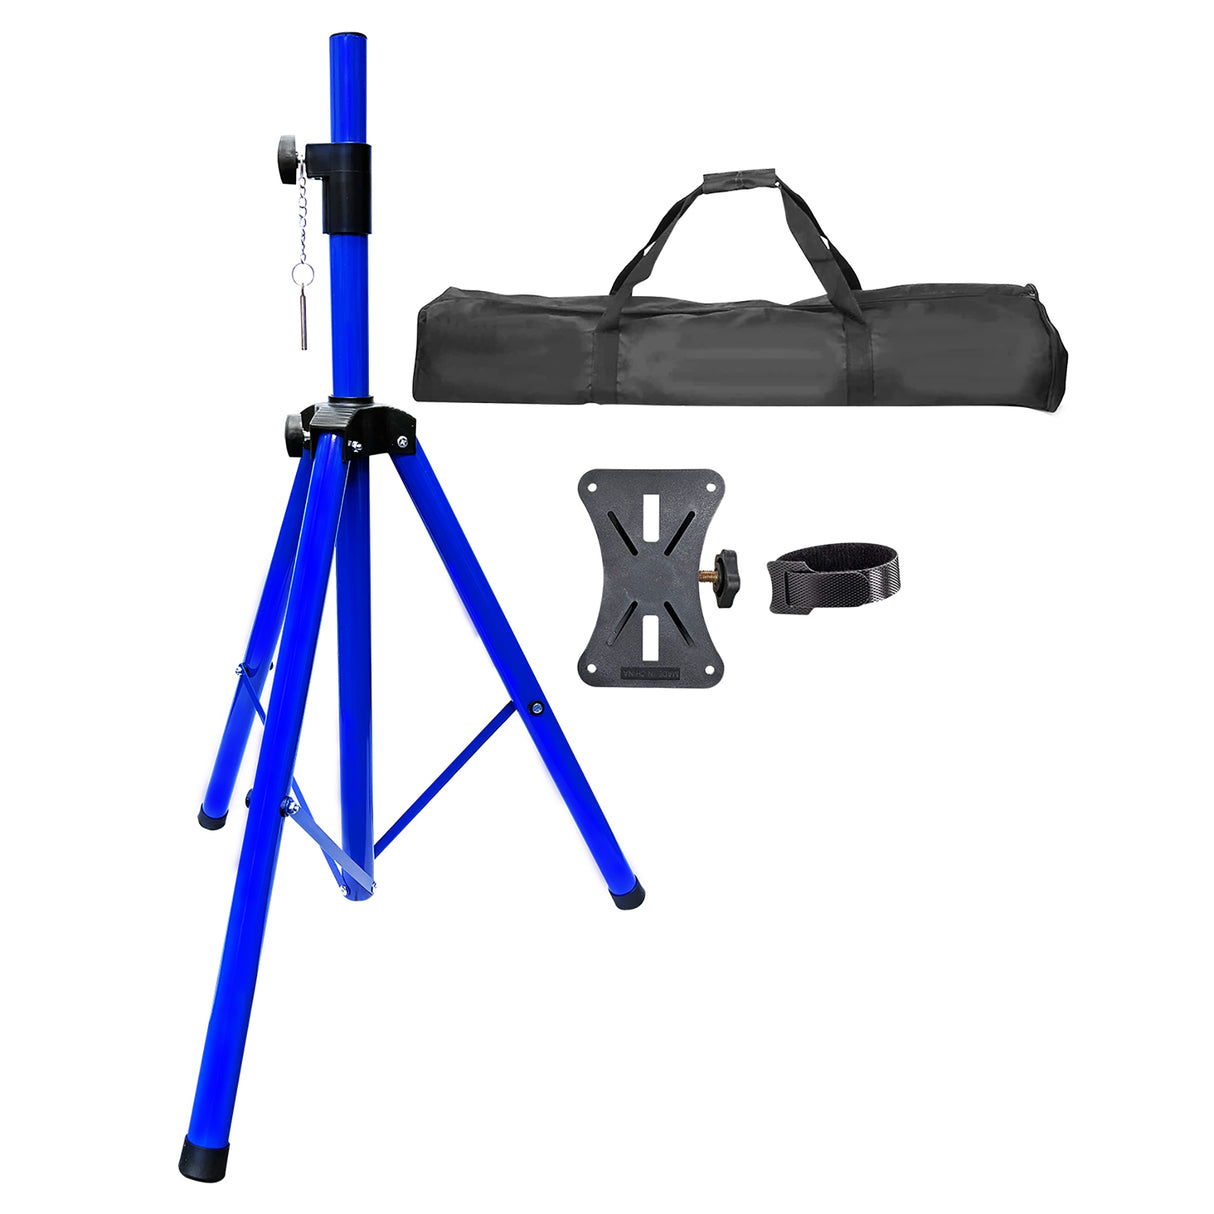 5 Core PA Speaker Stands Adjustable Height Professional Heavy Duty DJ Tripod with Mounting Bracket, Tie and Carrying Bag, Extend from 40 to 72 inches, Blue - Supports 132 lbs SS HD 1PK BLU